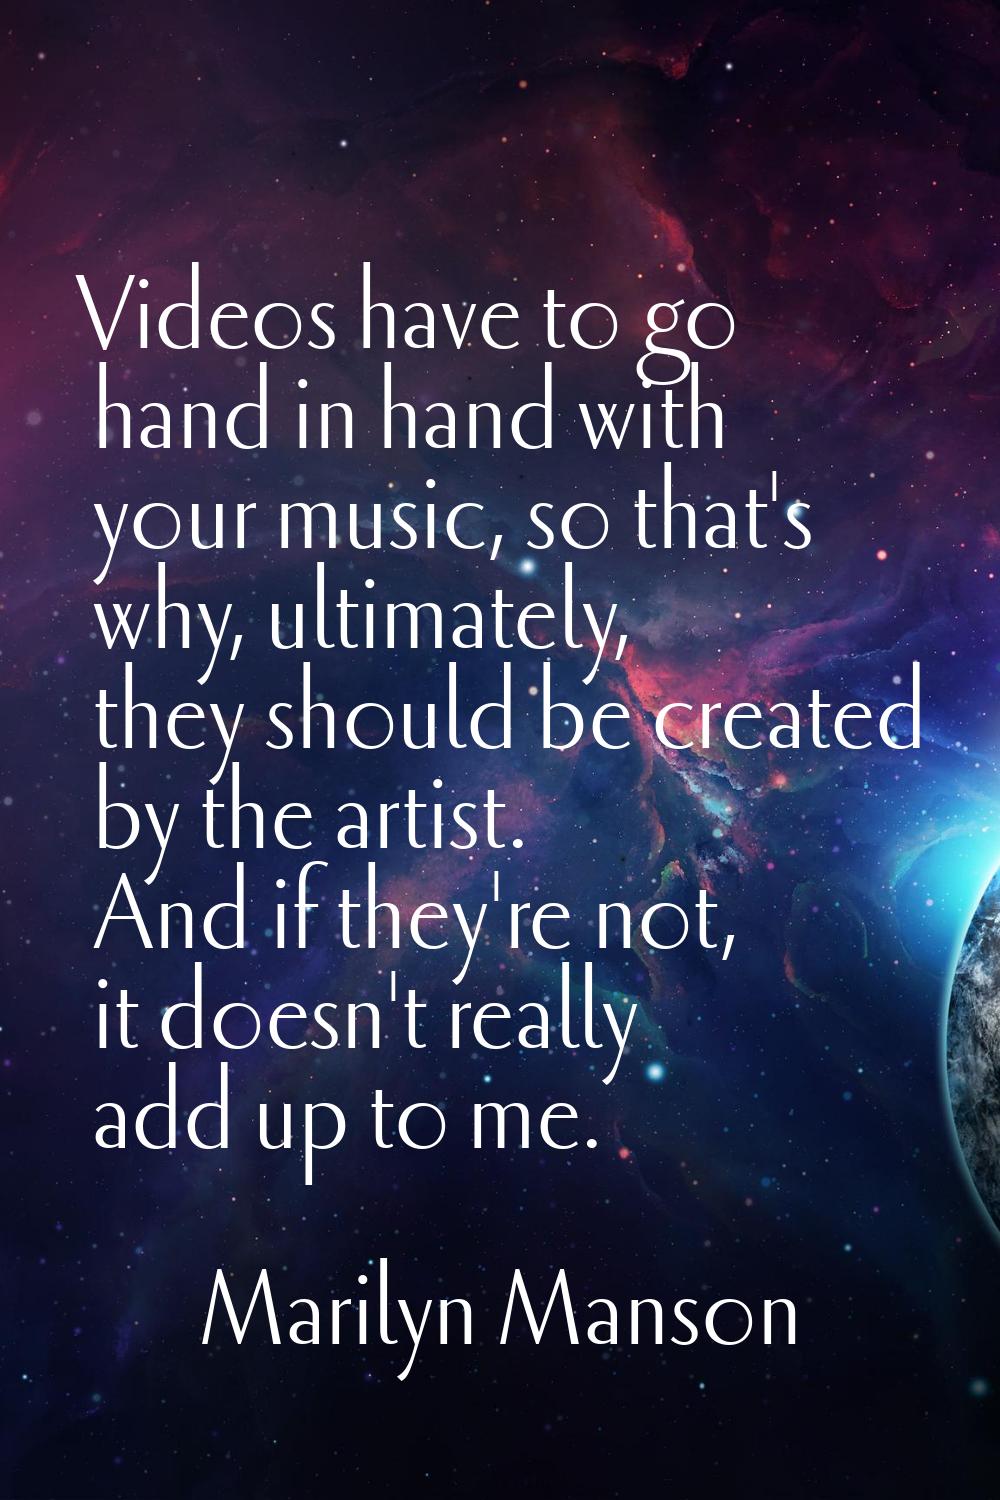 Videos have to go hand in hand with your music, so that's why, ultimately, they should be created b